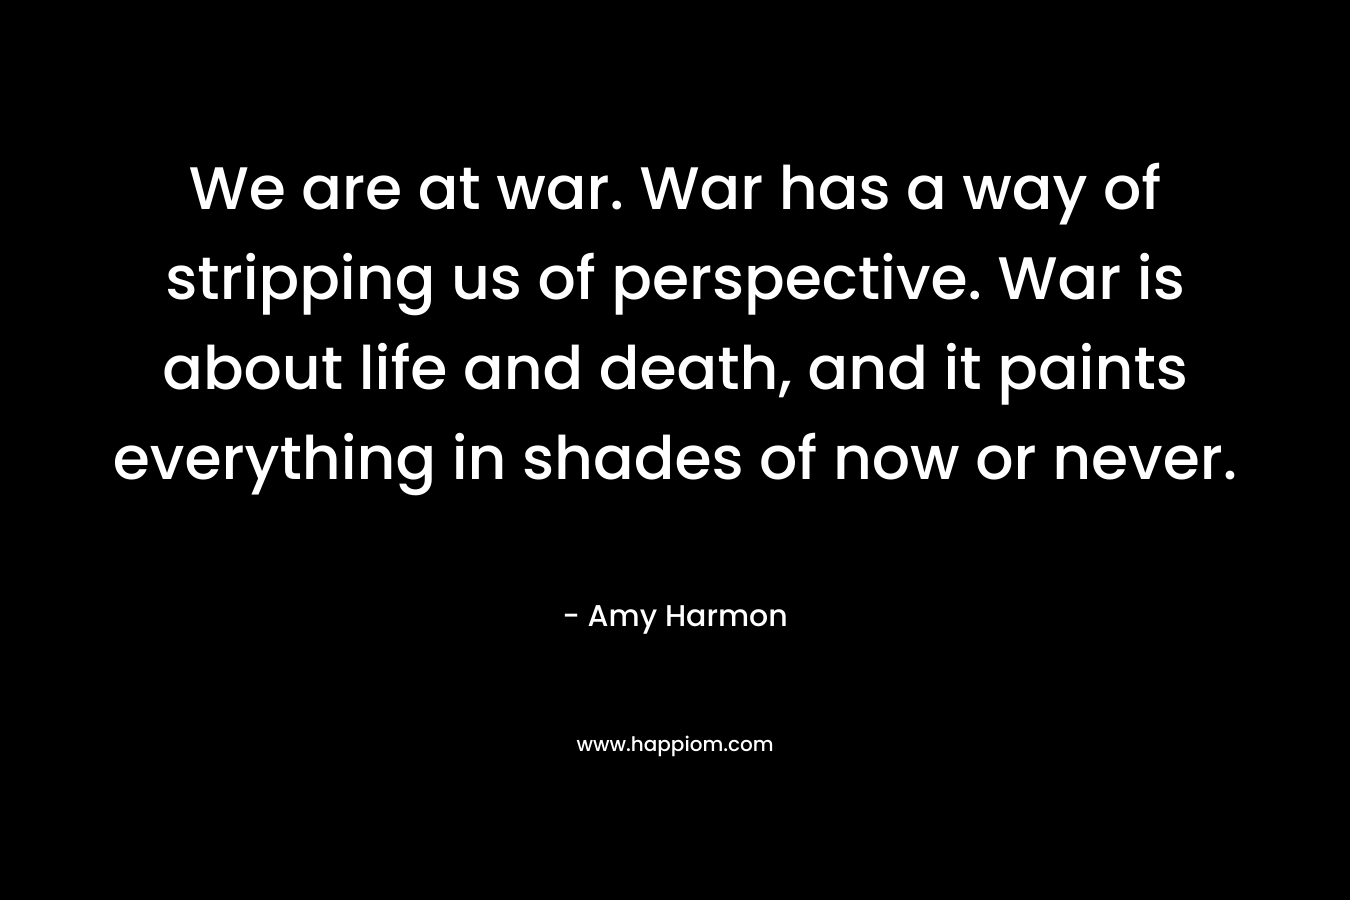 We are at war. War has a way of stripping us of perspective. War is about life and death, and it paints everything in shades of now or never.